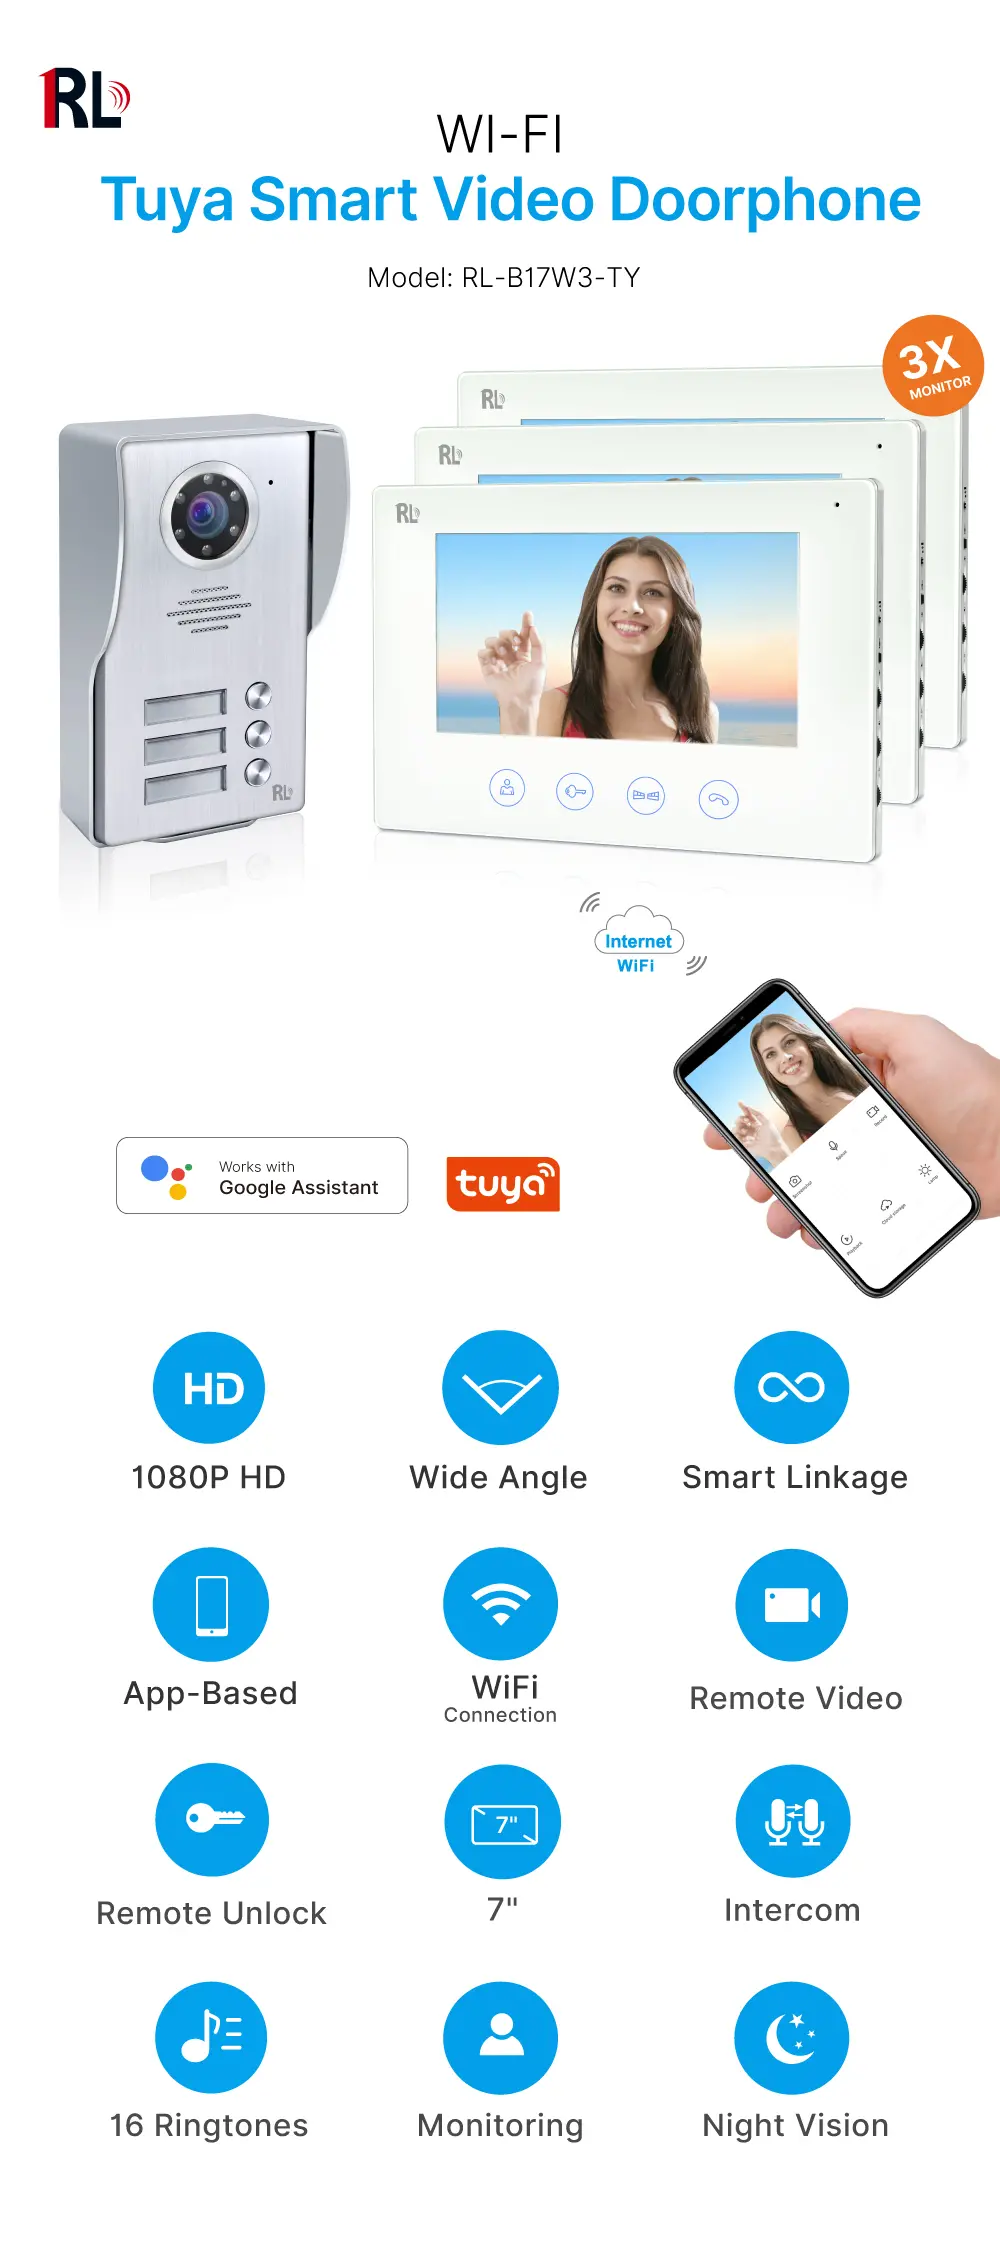 7 inch TUYA WIFI Smart Video Doorphone#RL-B17W3-TY- Easy 4-wire connection.- Between indoor & outdoor units See, hear and speak to visitors from anywhere 1080P AHD Doorbell .- Built-in Mega HD camera - Night Vision camera. _01